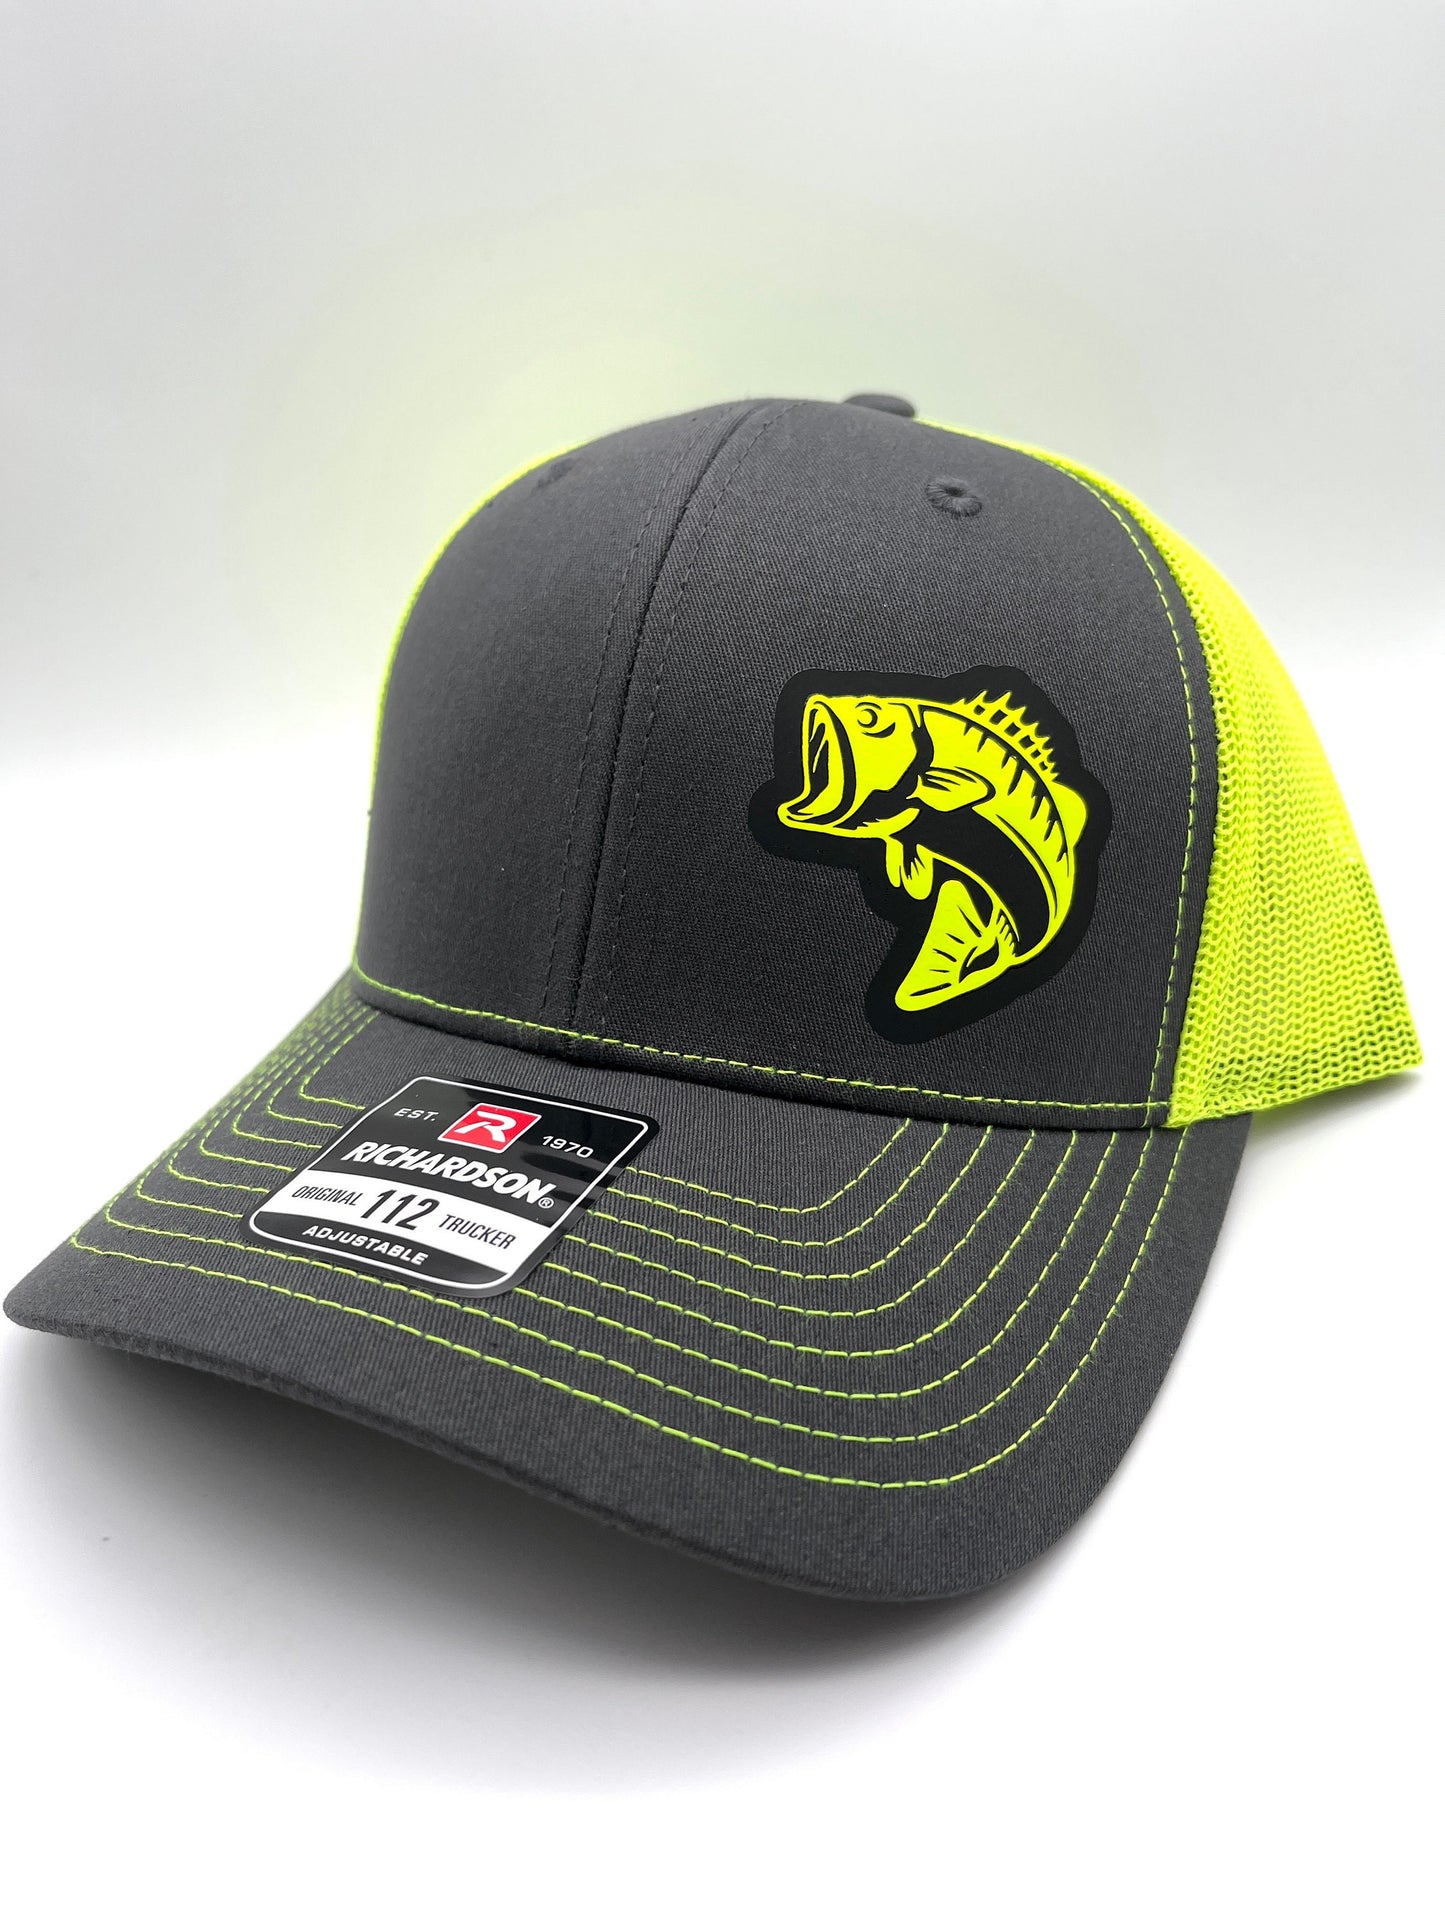 Large Mouth Bass Fishing Snap Back Adjustable Hat with Multiple Hat Options